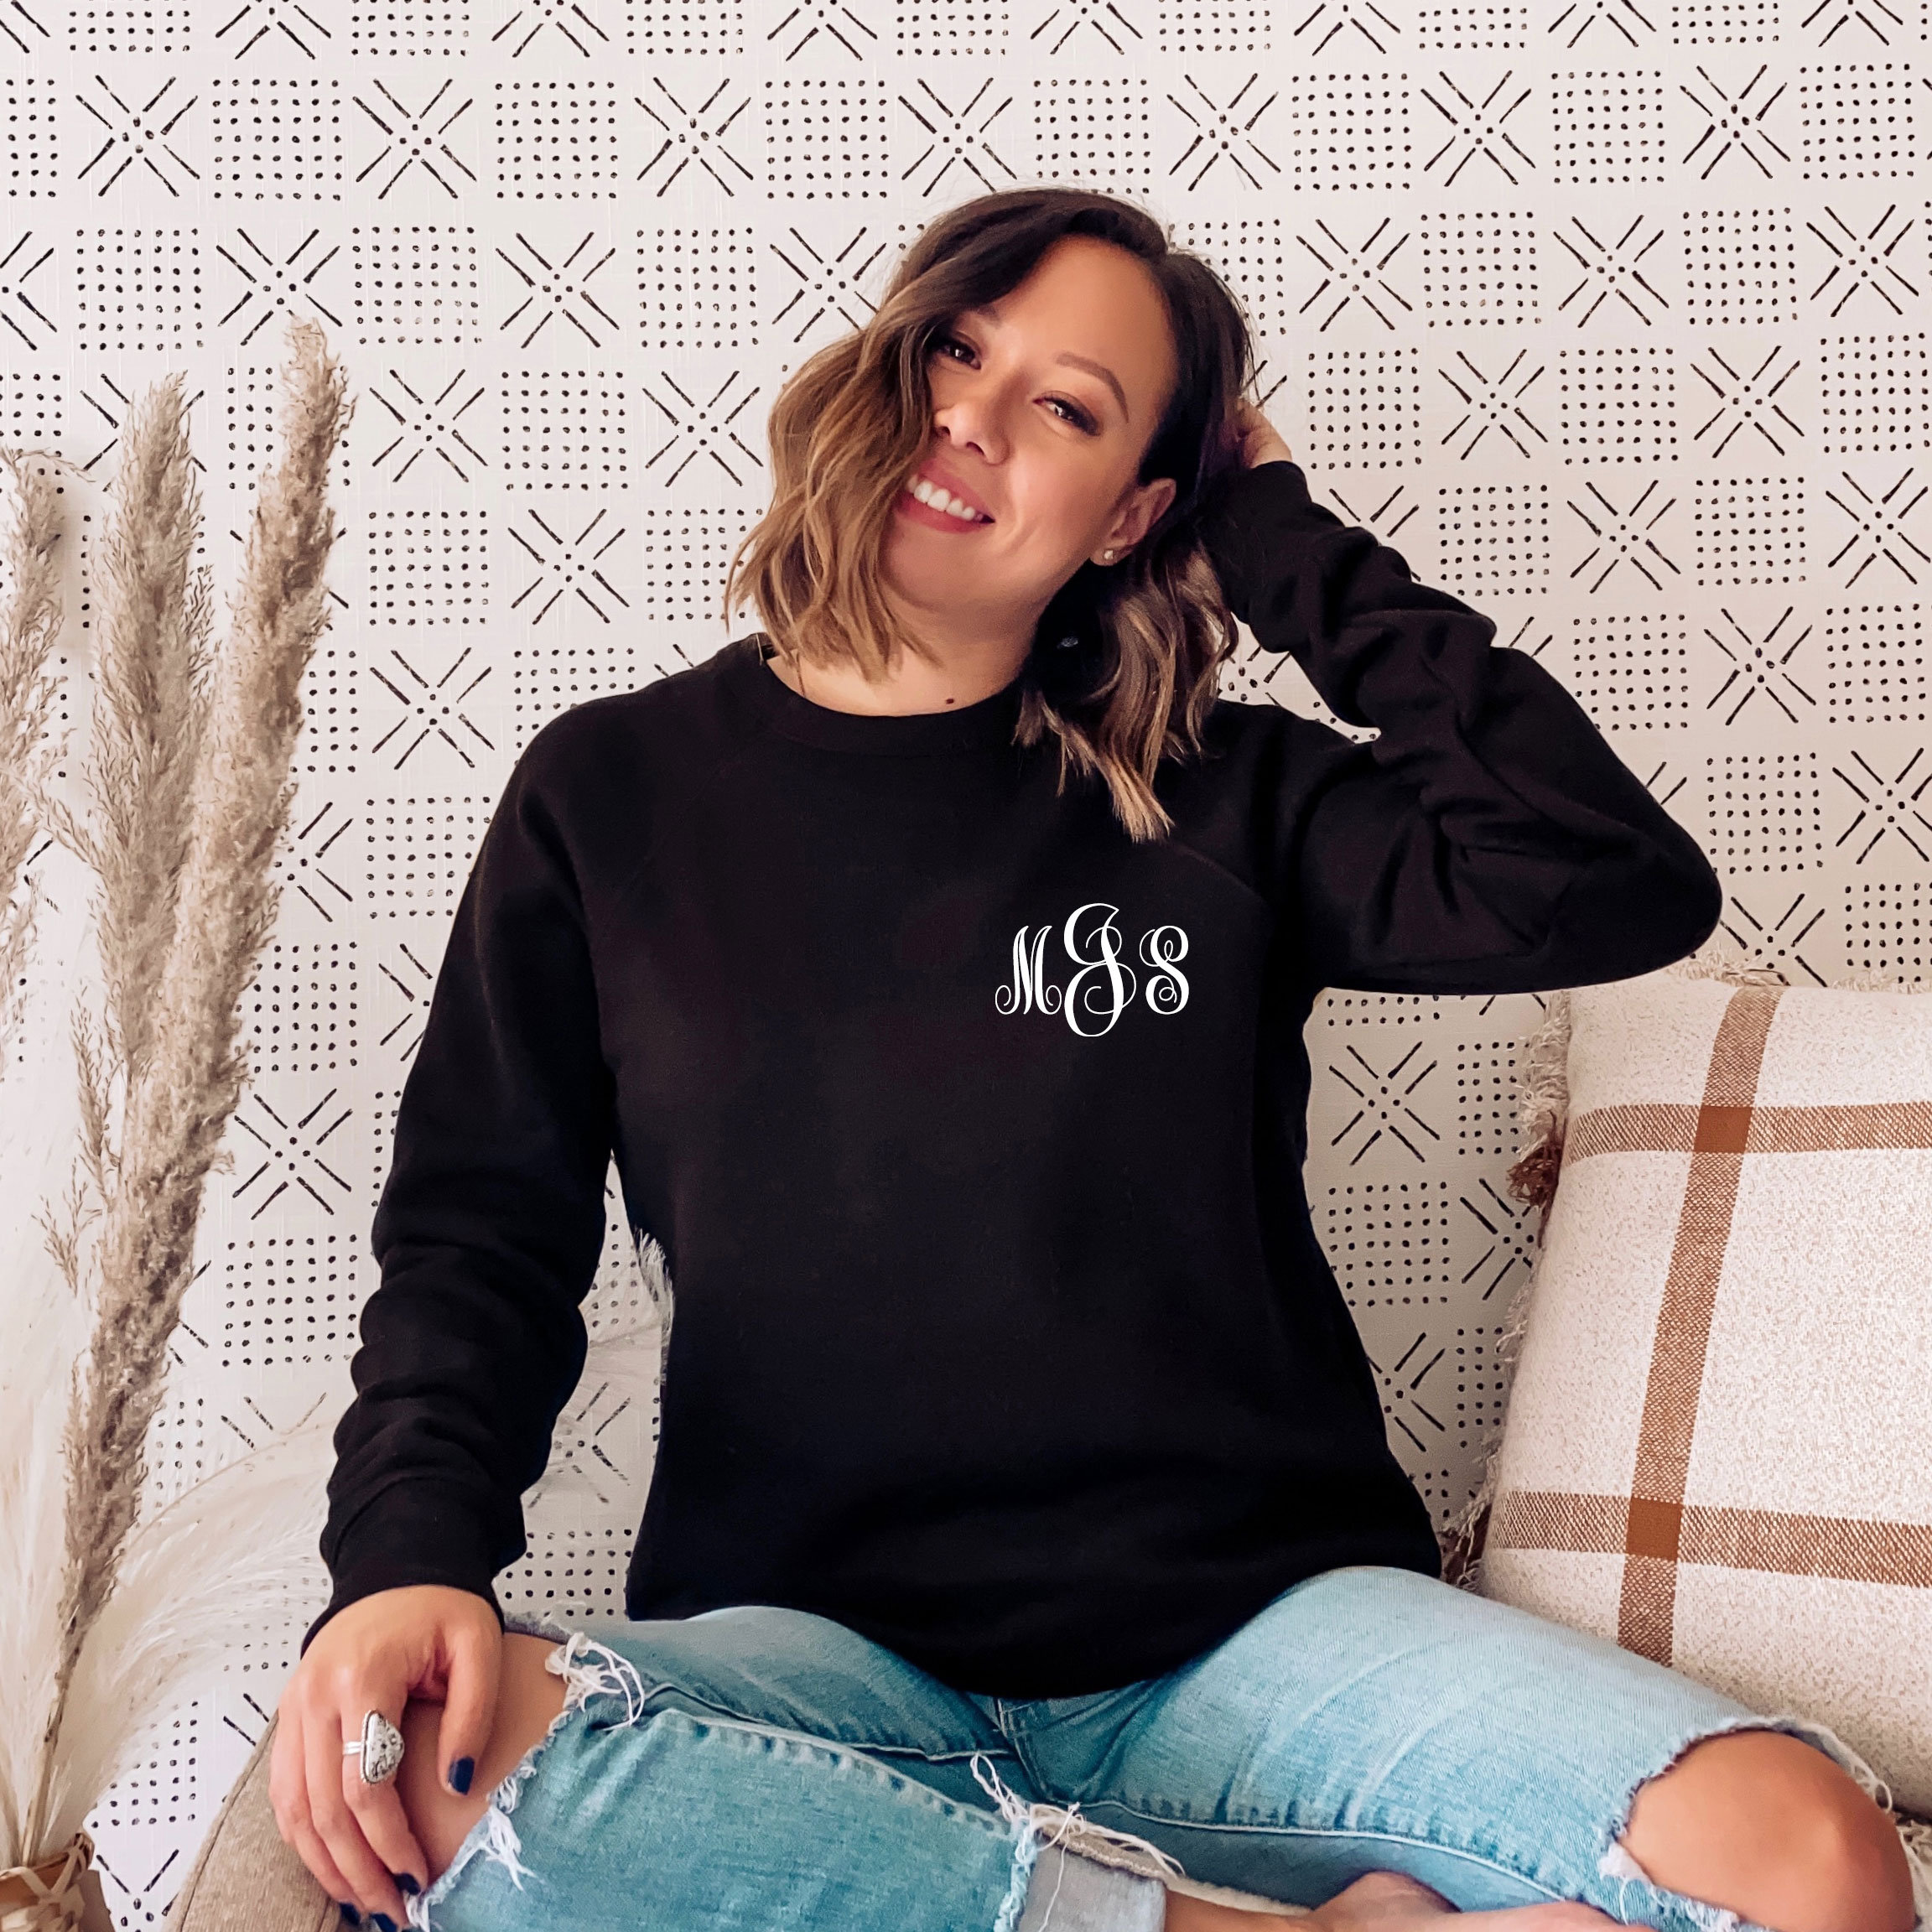 Embroidered Sweatshirt for Women Monogram Embroidered 